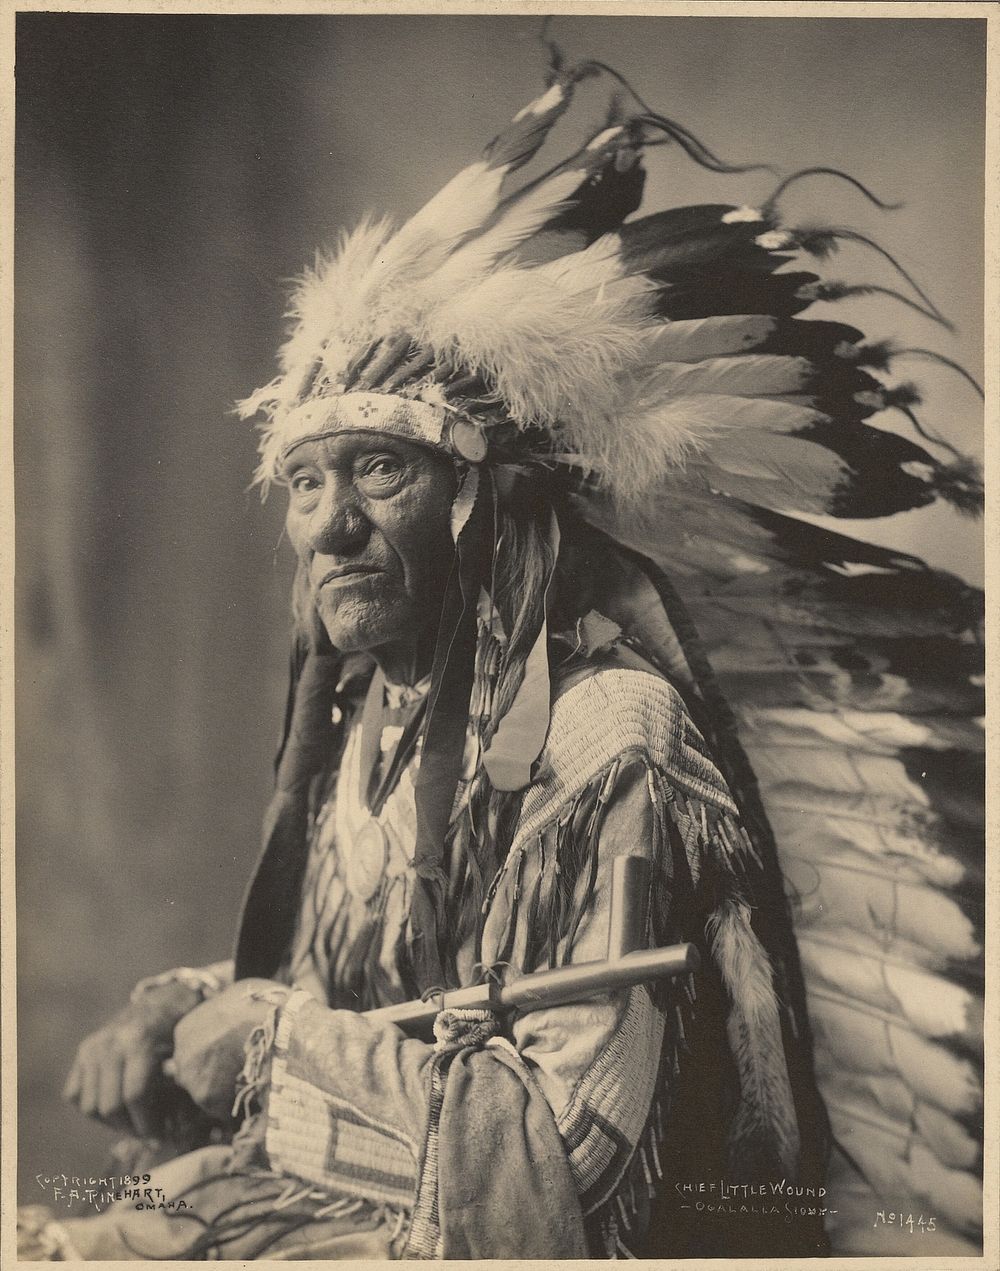 Chief Little Wound, Ogalalla Sioux by Adolph F Muhr and Frank A Rinehart